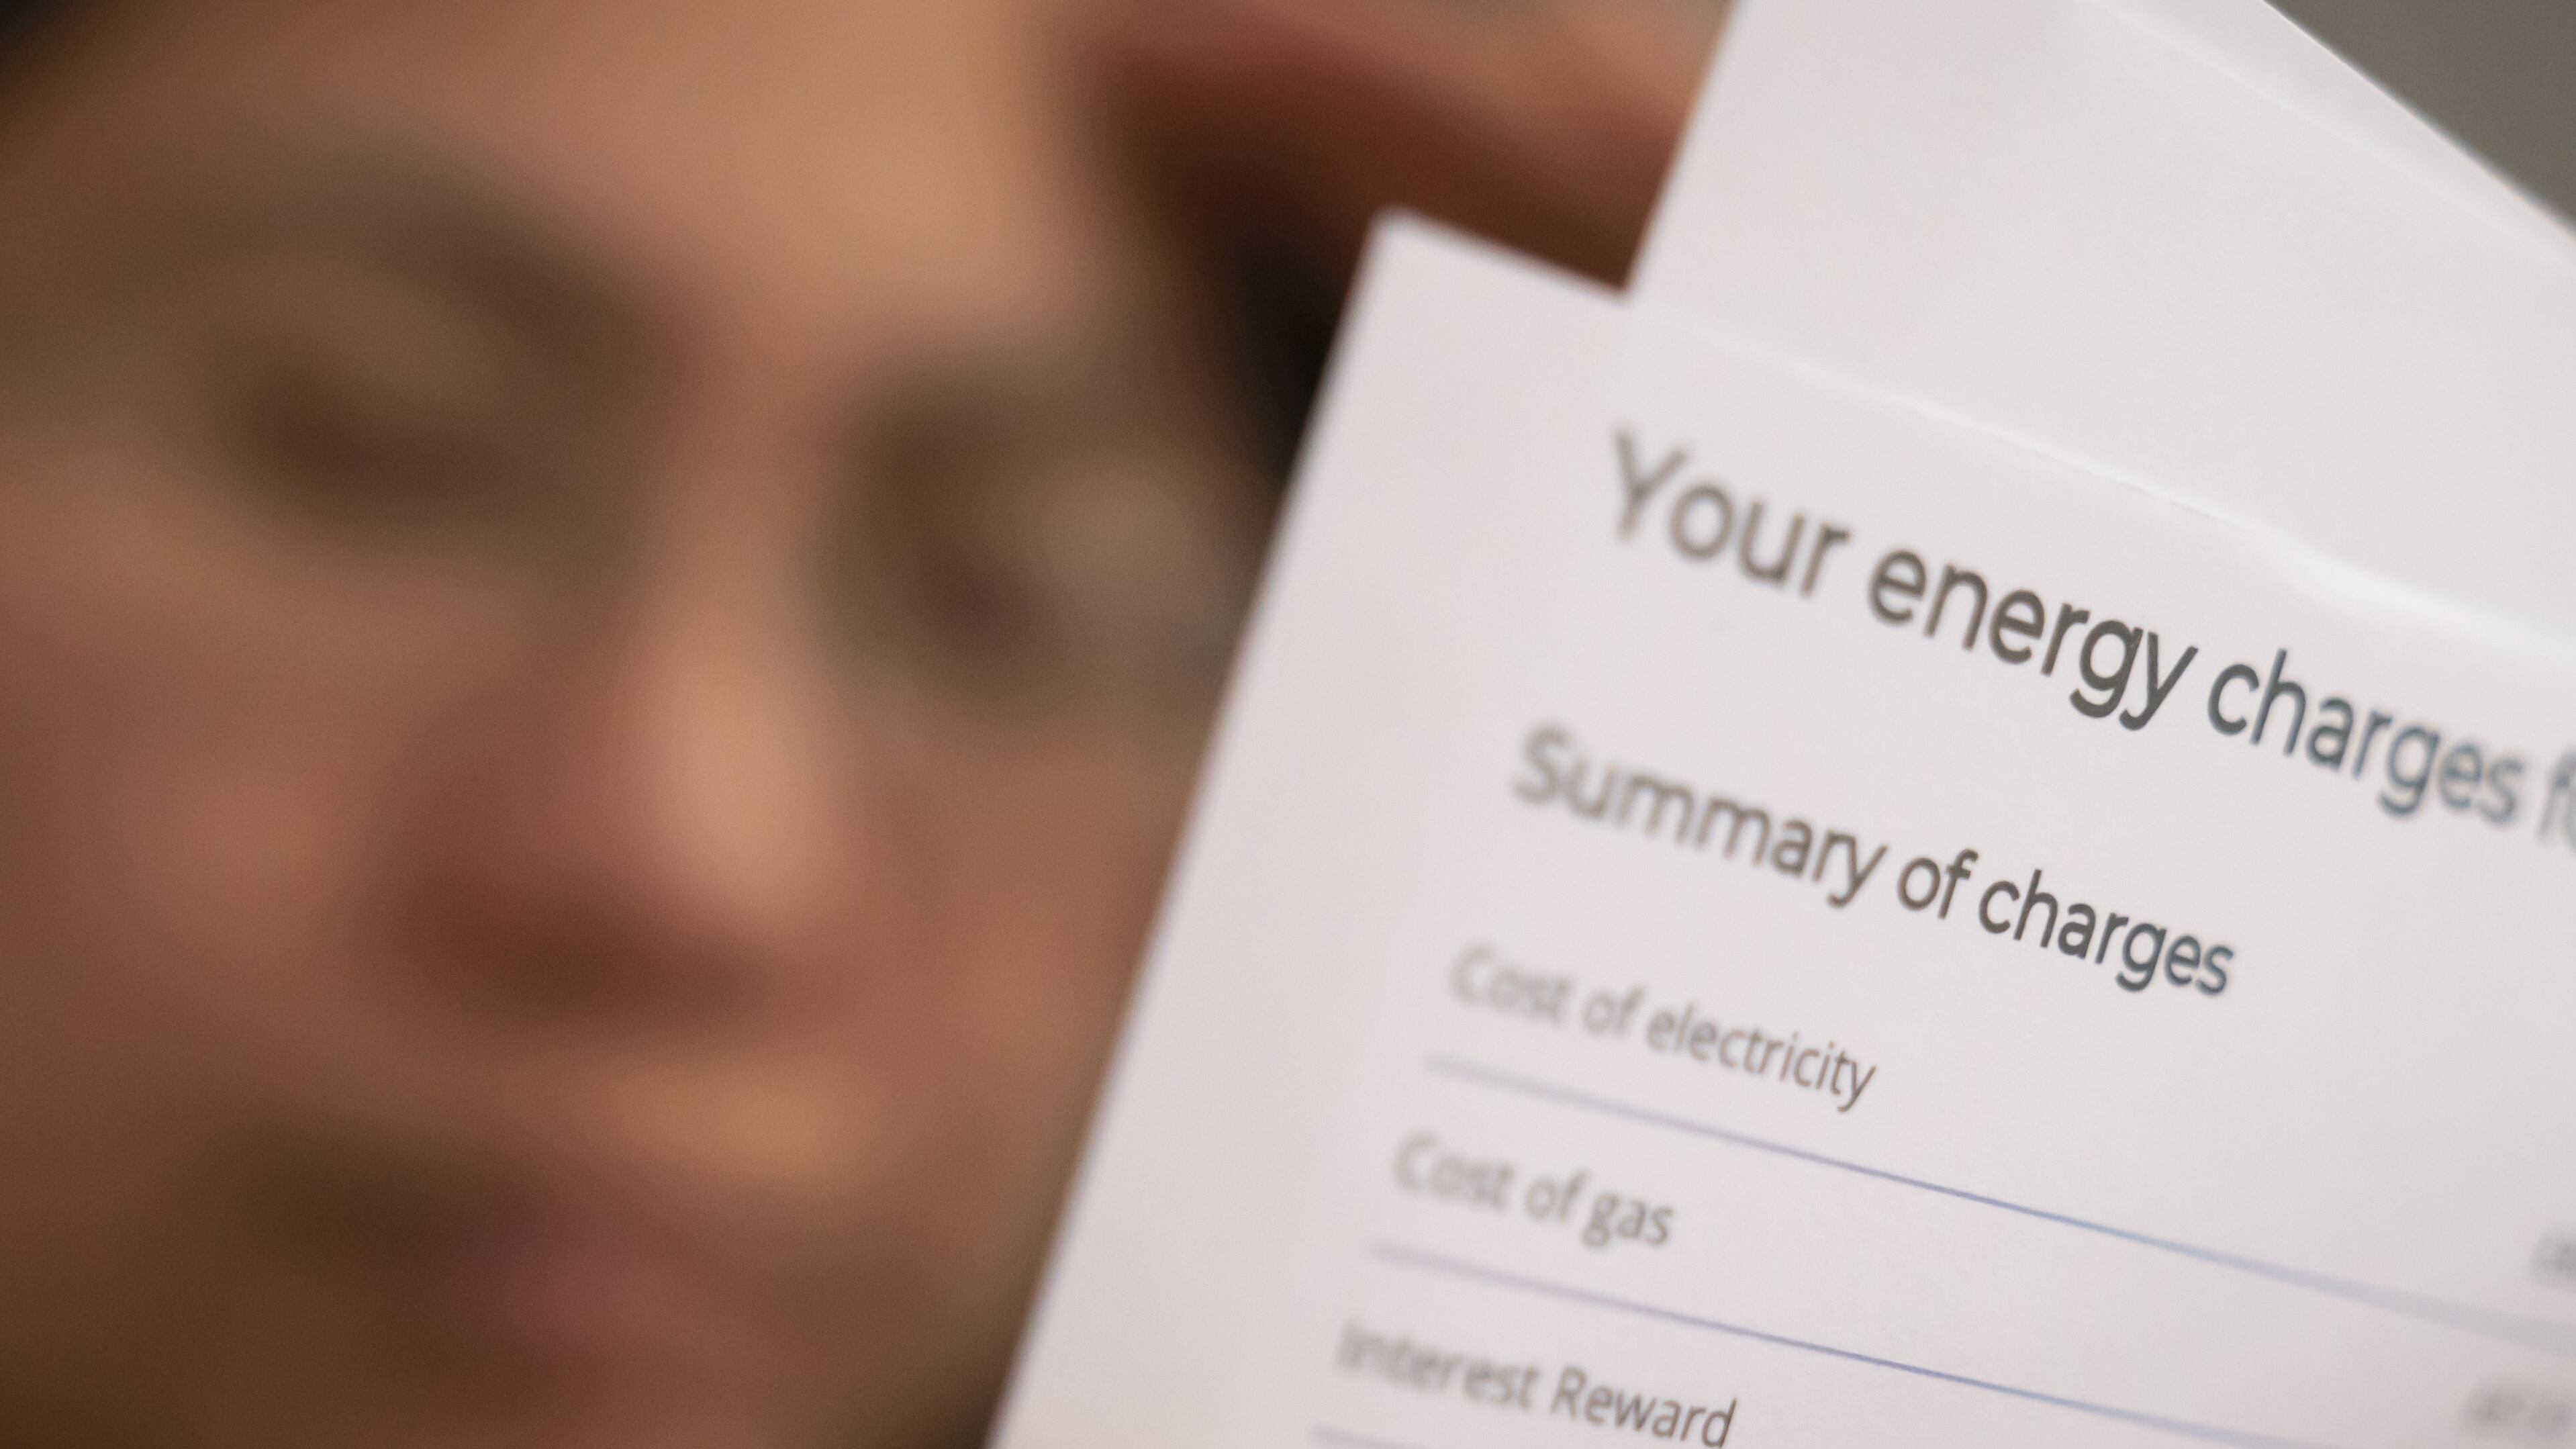 Citizens Advice reported that record numbers of households asked it for help with energy issues between January and March